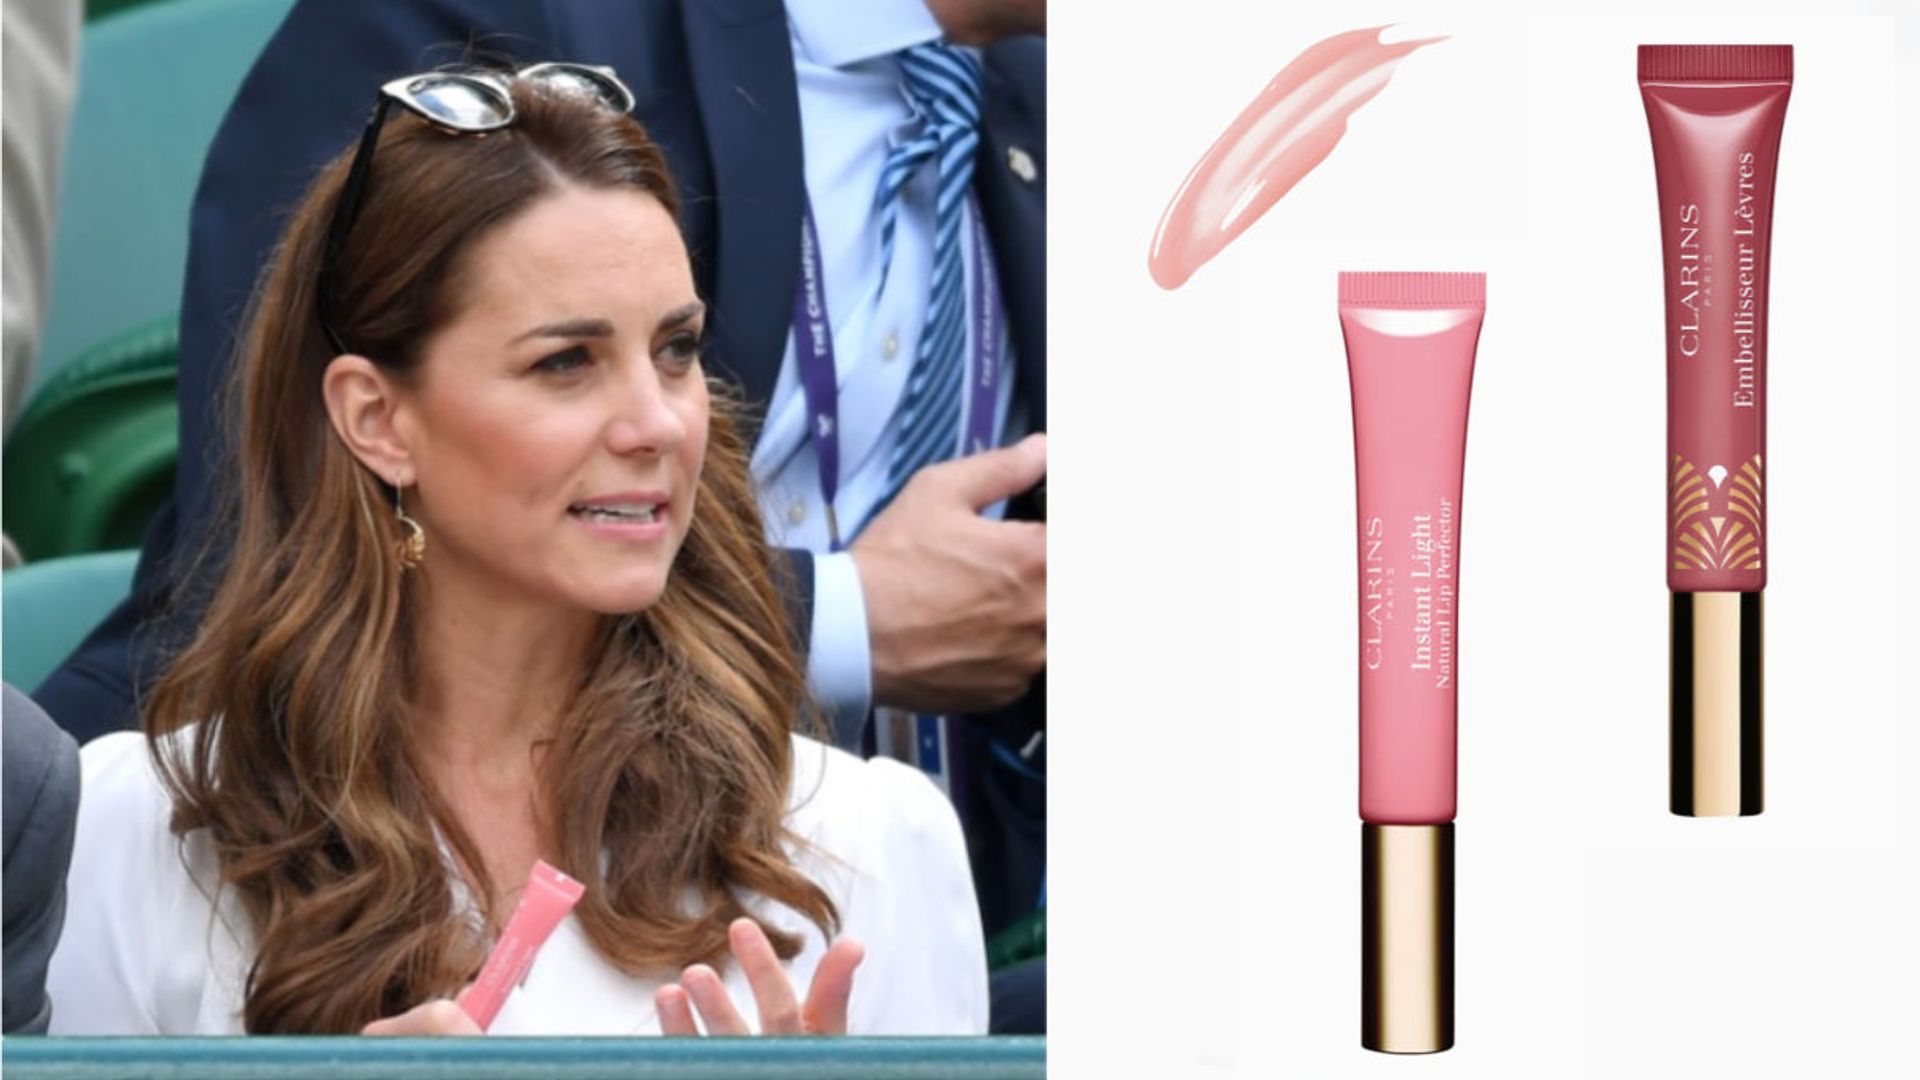 PSA: Kate Middleton's favourite Clarins lip gloss is on sale for 40% off (and this very rarely happens) 